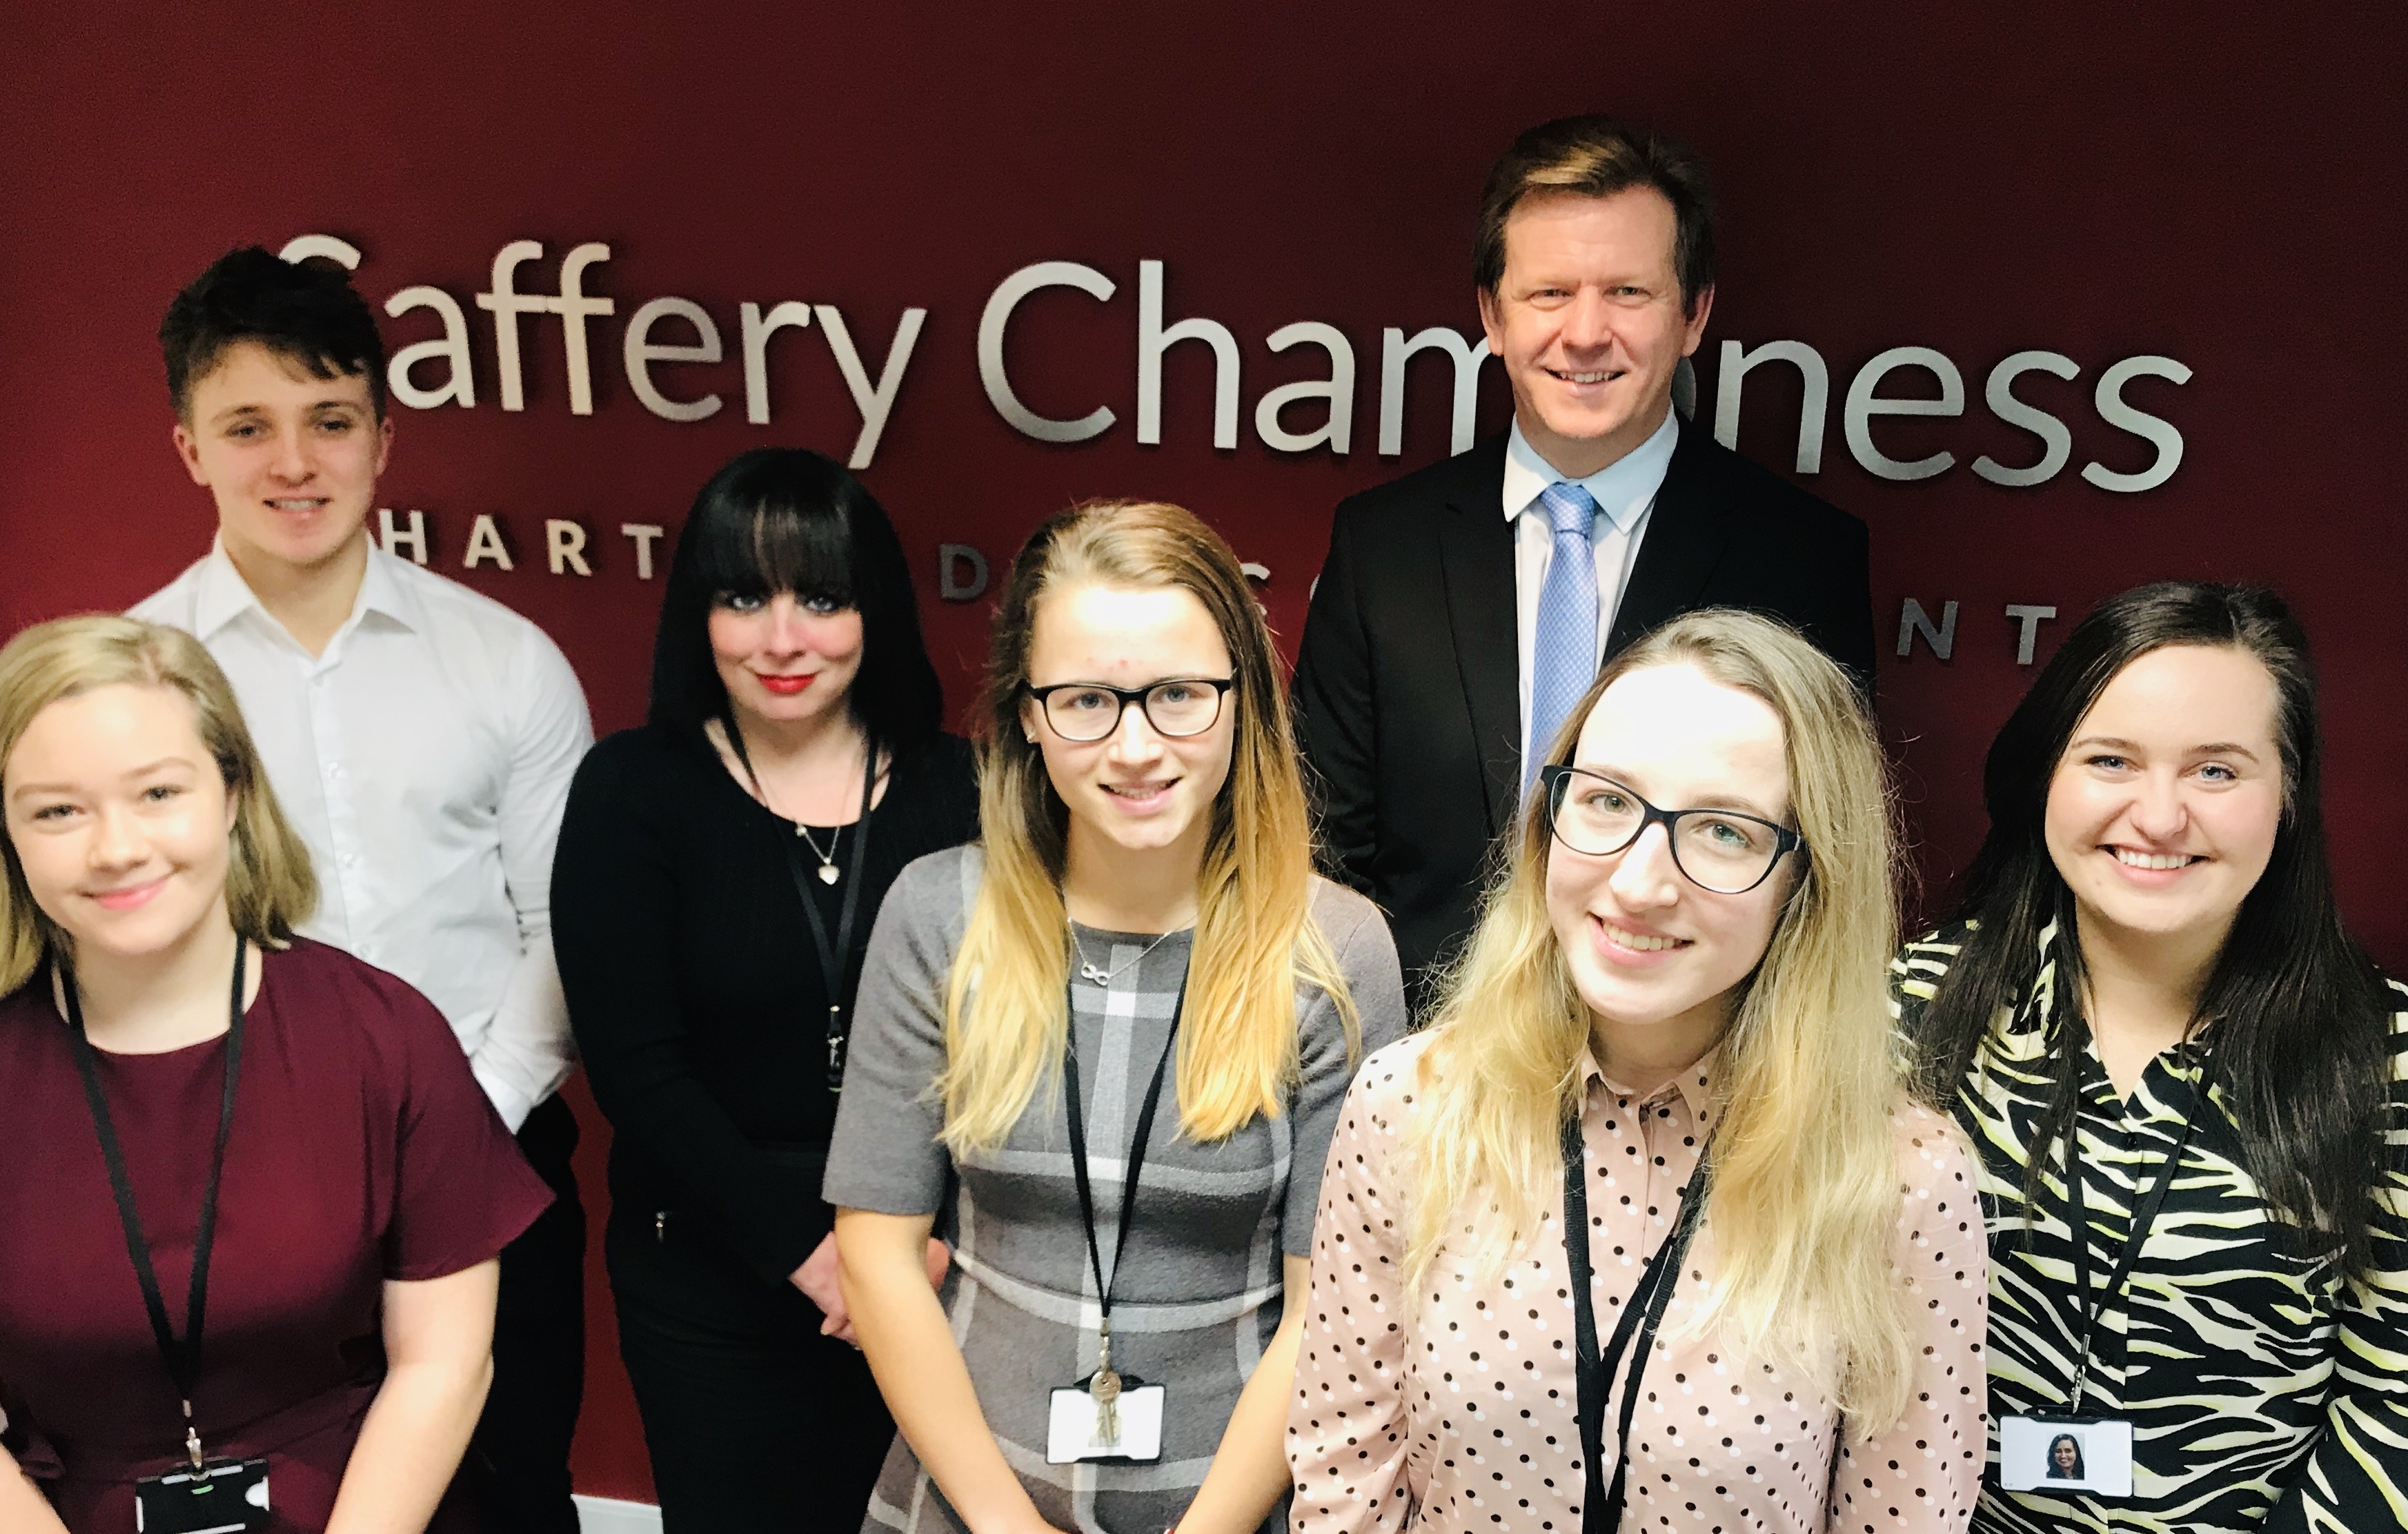 ﻿Safferys building team for the new generation of business advisors